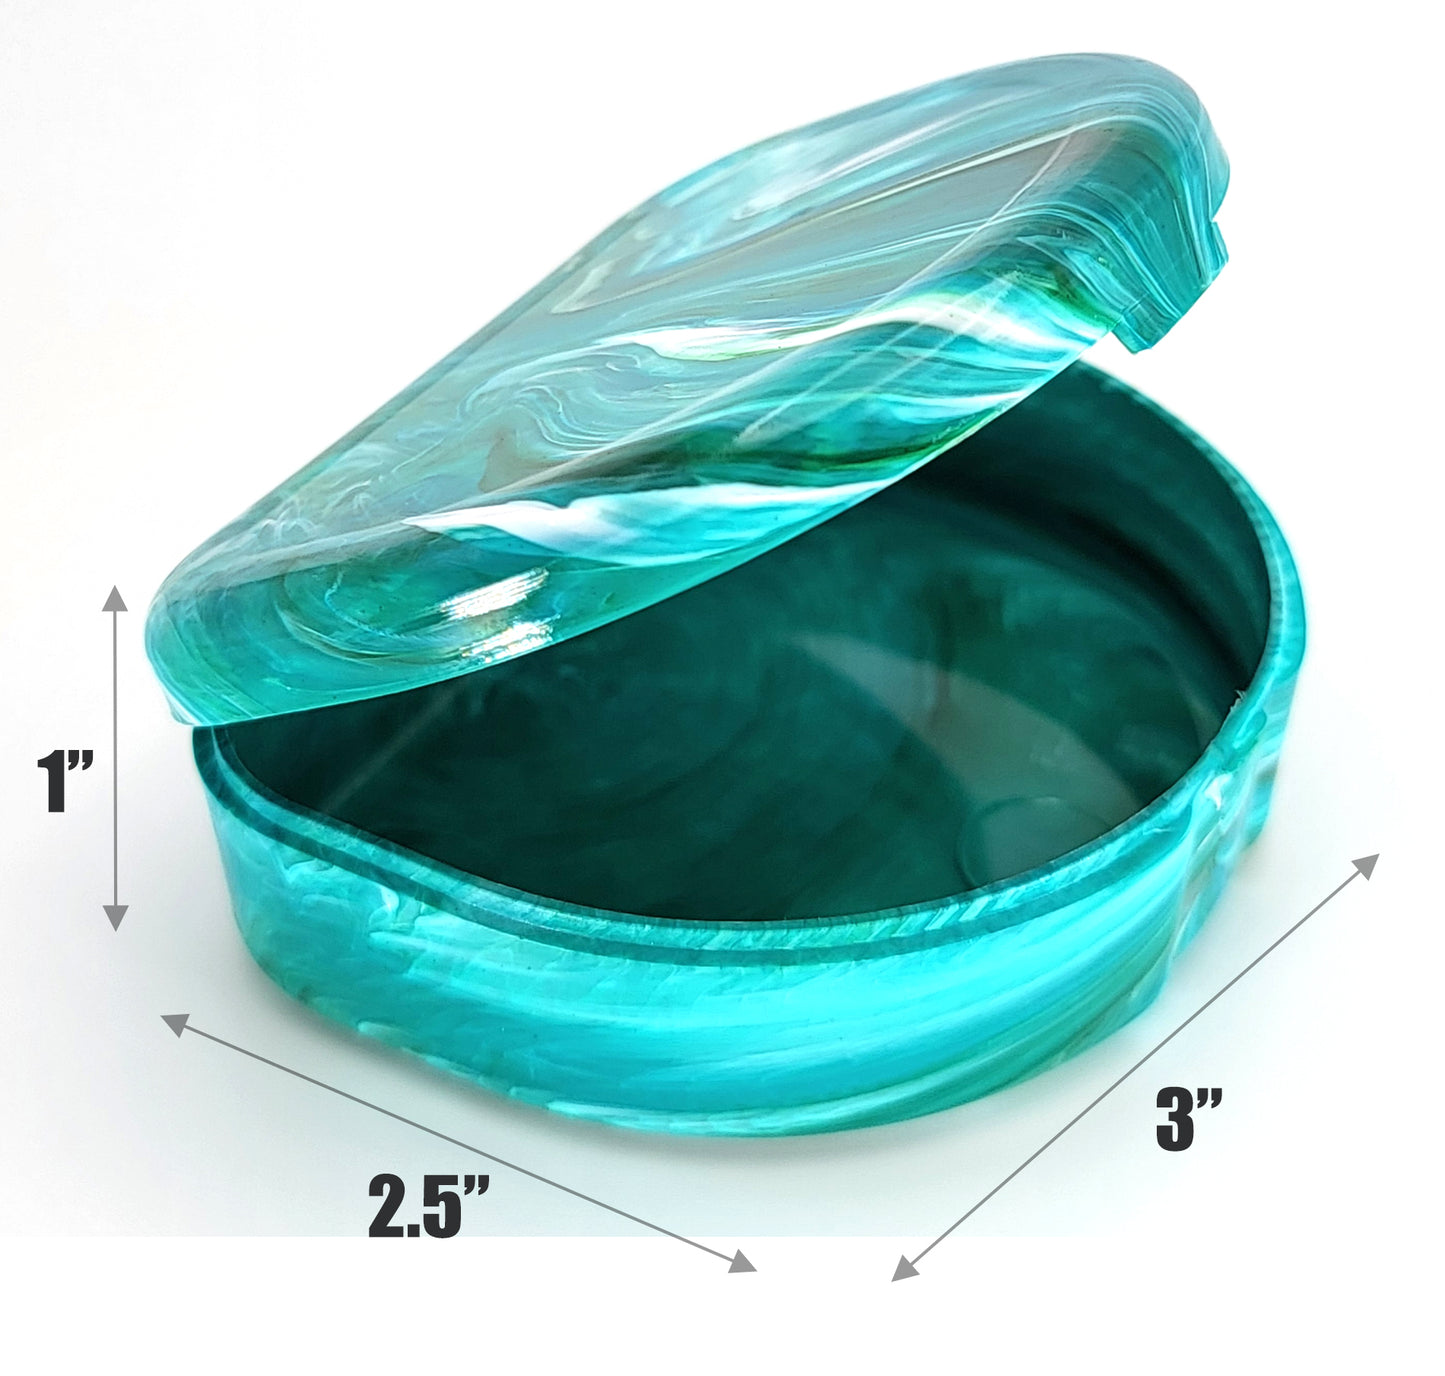 Retainer Case - Color Splash Collection - Turquoise Earth